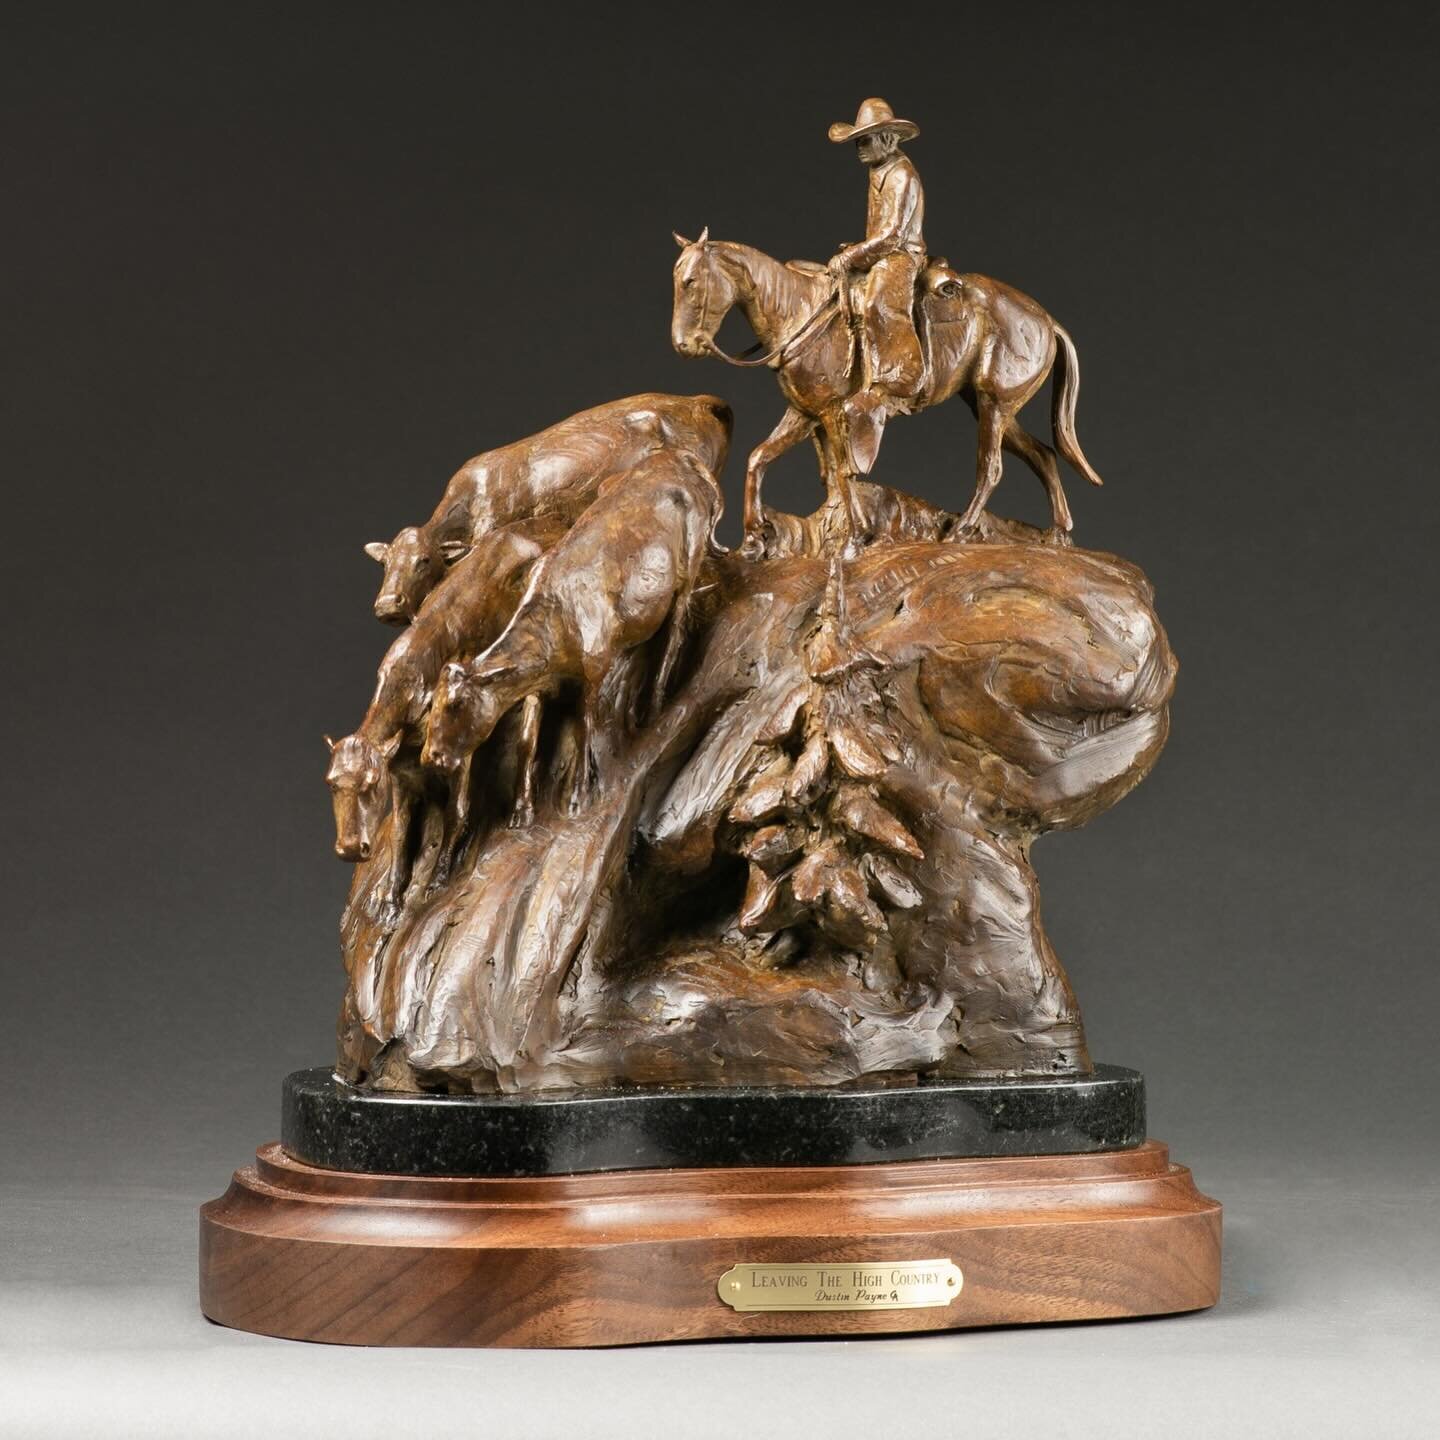 Throwback to a piece I did in 2019. &ldquo;Leaving the High Country&rdquo; is a limited edition of 12 and pays homage to the American Rancher.⁠
⁠
#cowboyartistsofamerica #westernart #westernsculpture #cowboyart #cowboyartist #westernstyle